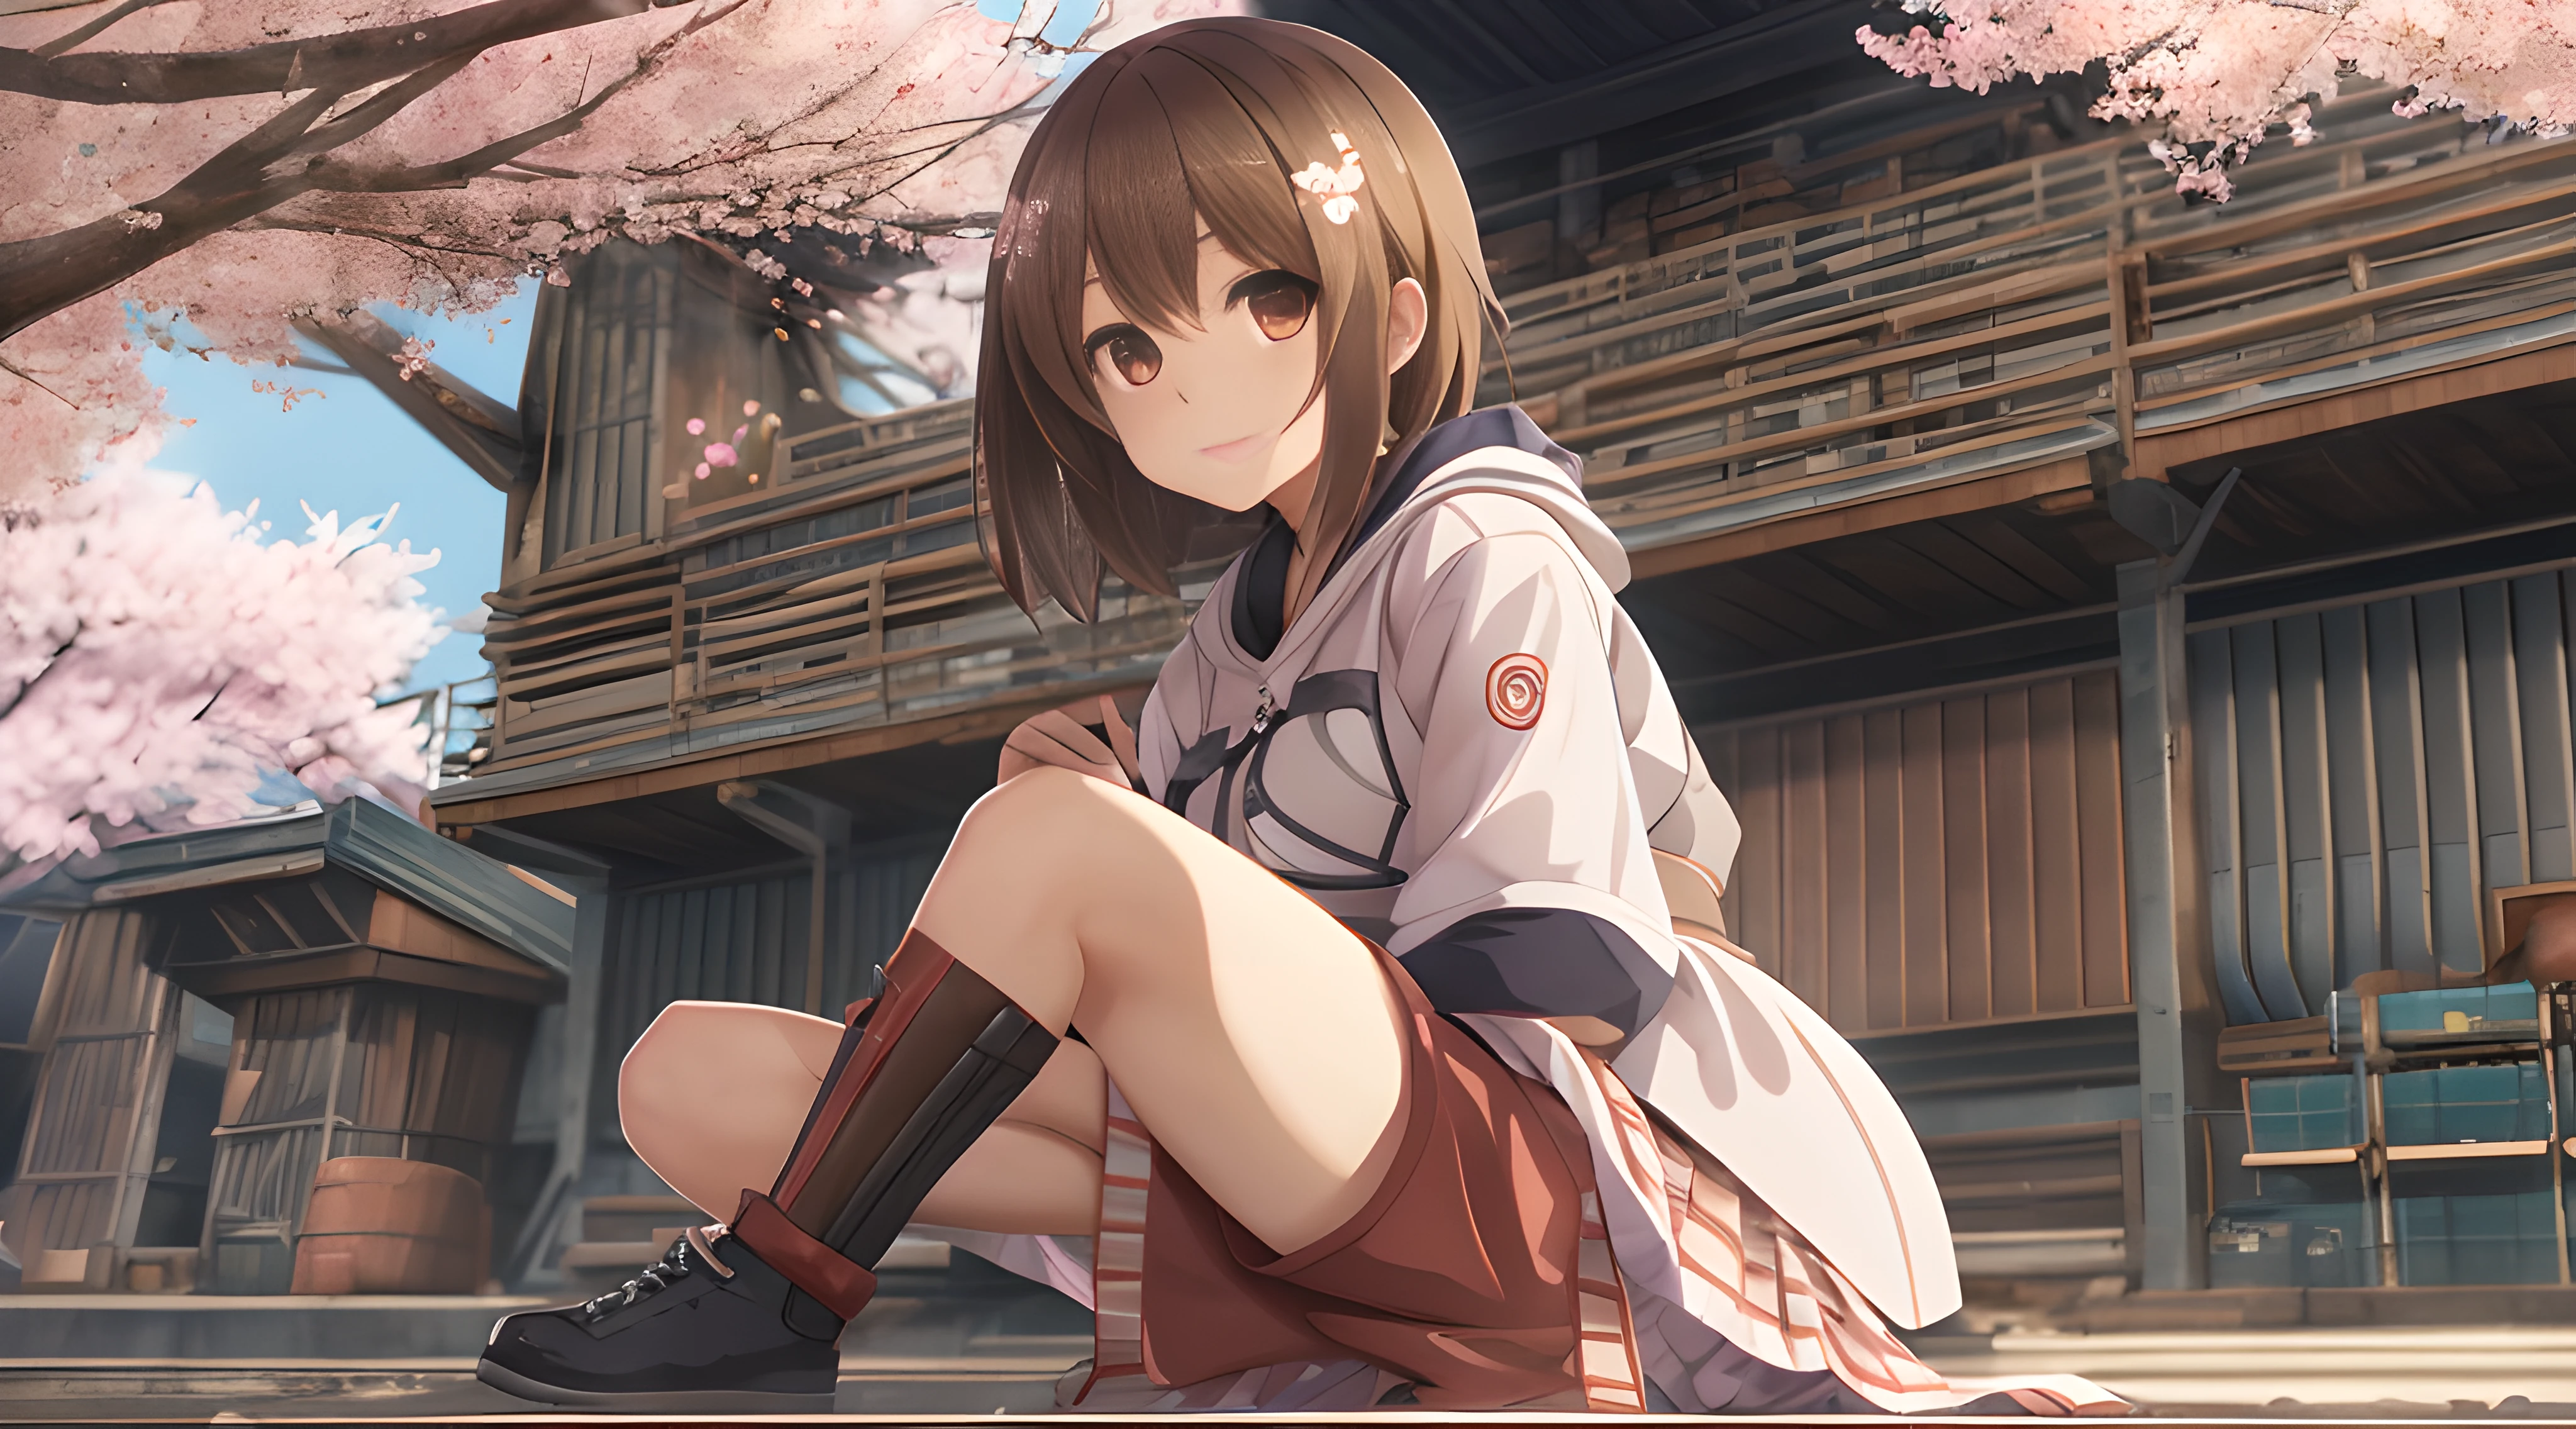 (Best Quality), (8K), (Detailed background), factories, Brown eyes, Upper body, Komono, cherryblossom, a macro giantess, beautiful anime girl squatting, der riese,